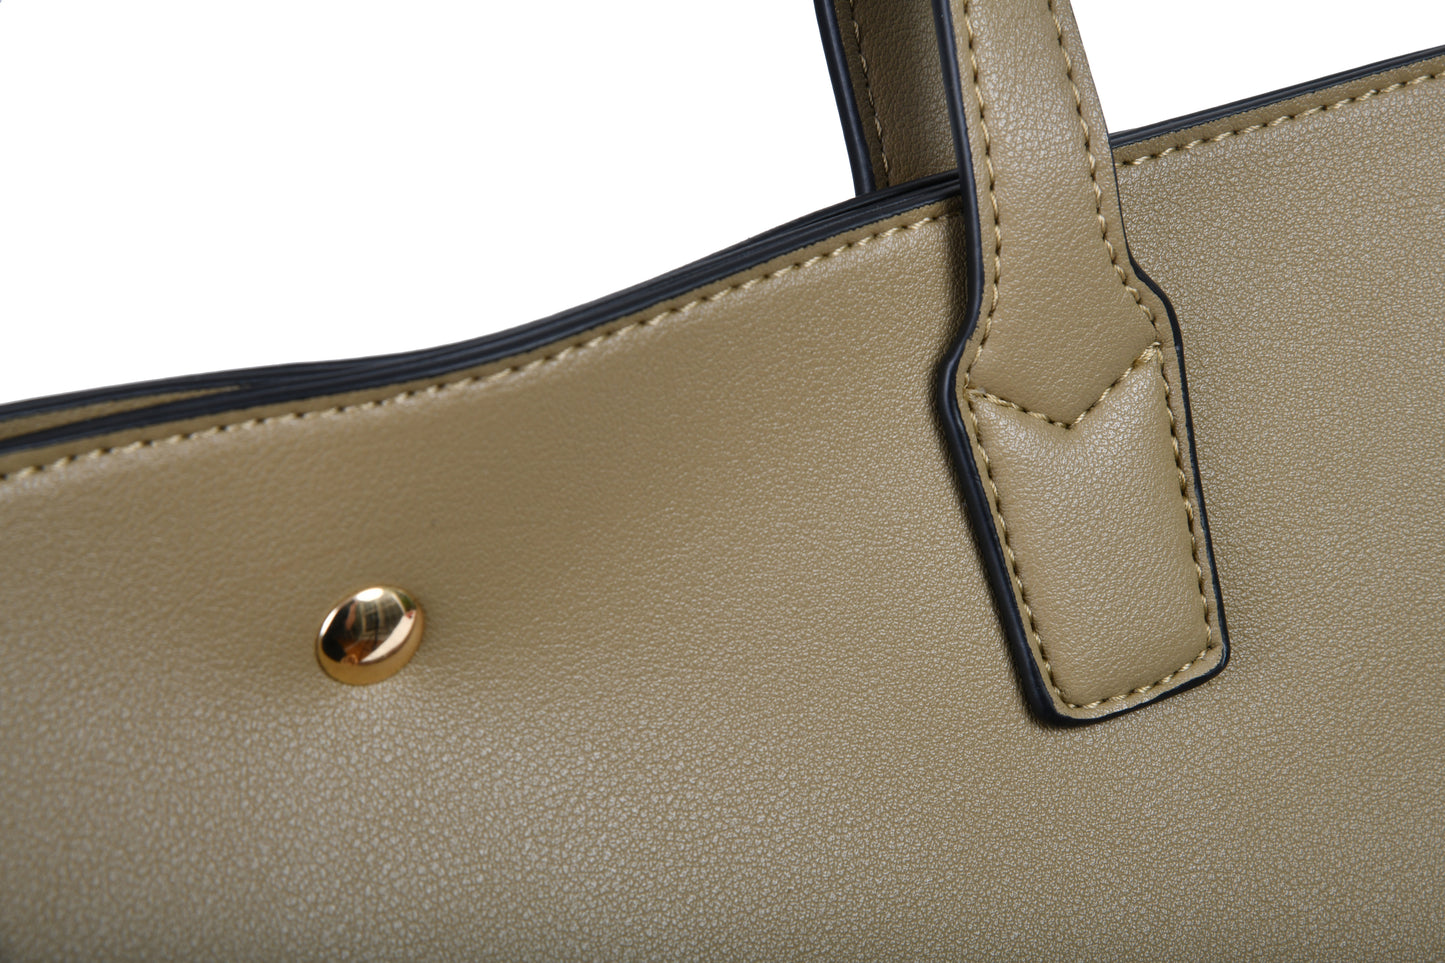 Zuma Pebble Grain Faux Leather Olive Green Big Tote Bag Beach Bag made bye Dewi Maya detail photo of pebble grain faux leather and stitching available at the best boutique in Upstate South Carolina Spartanburg Greenville Dewi Maya Boutique